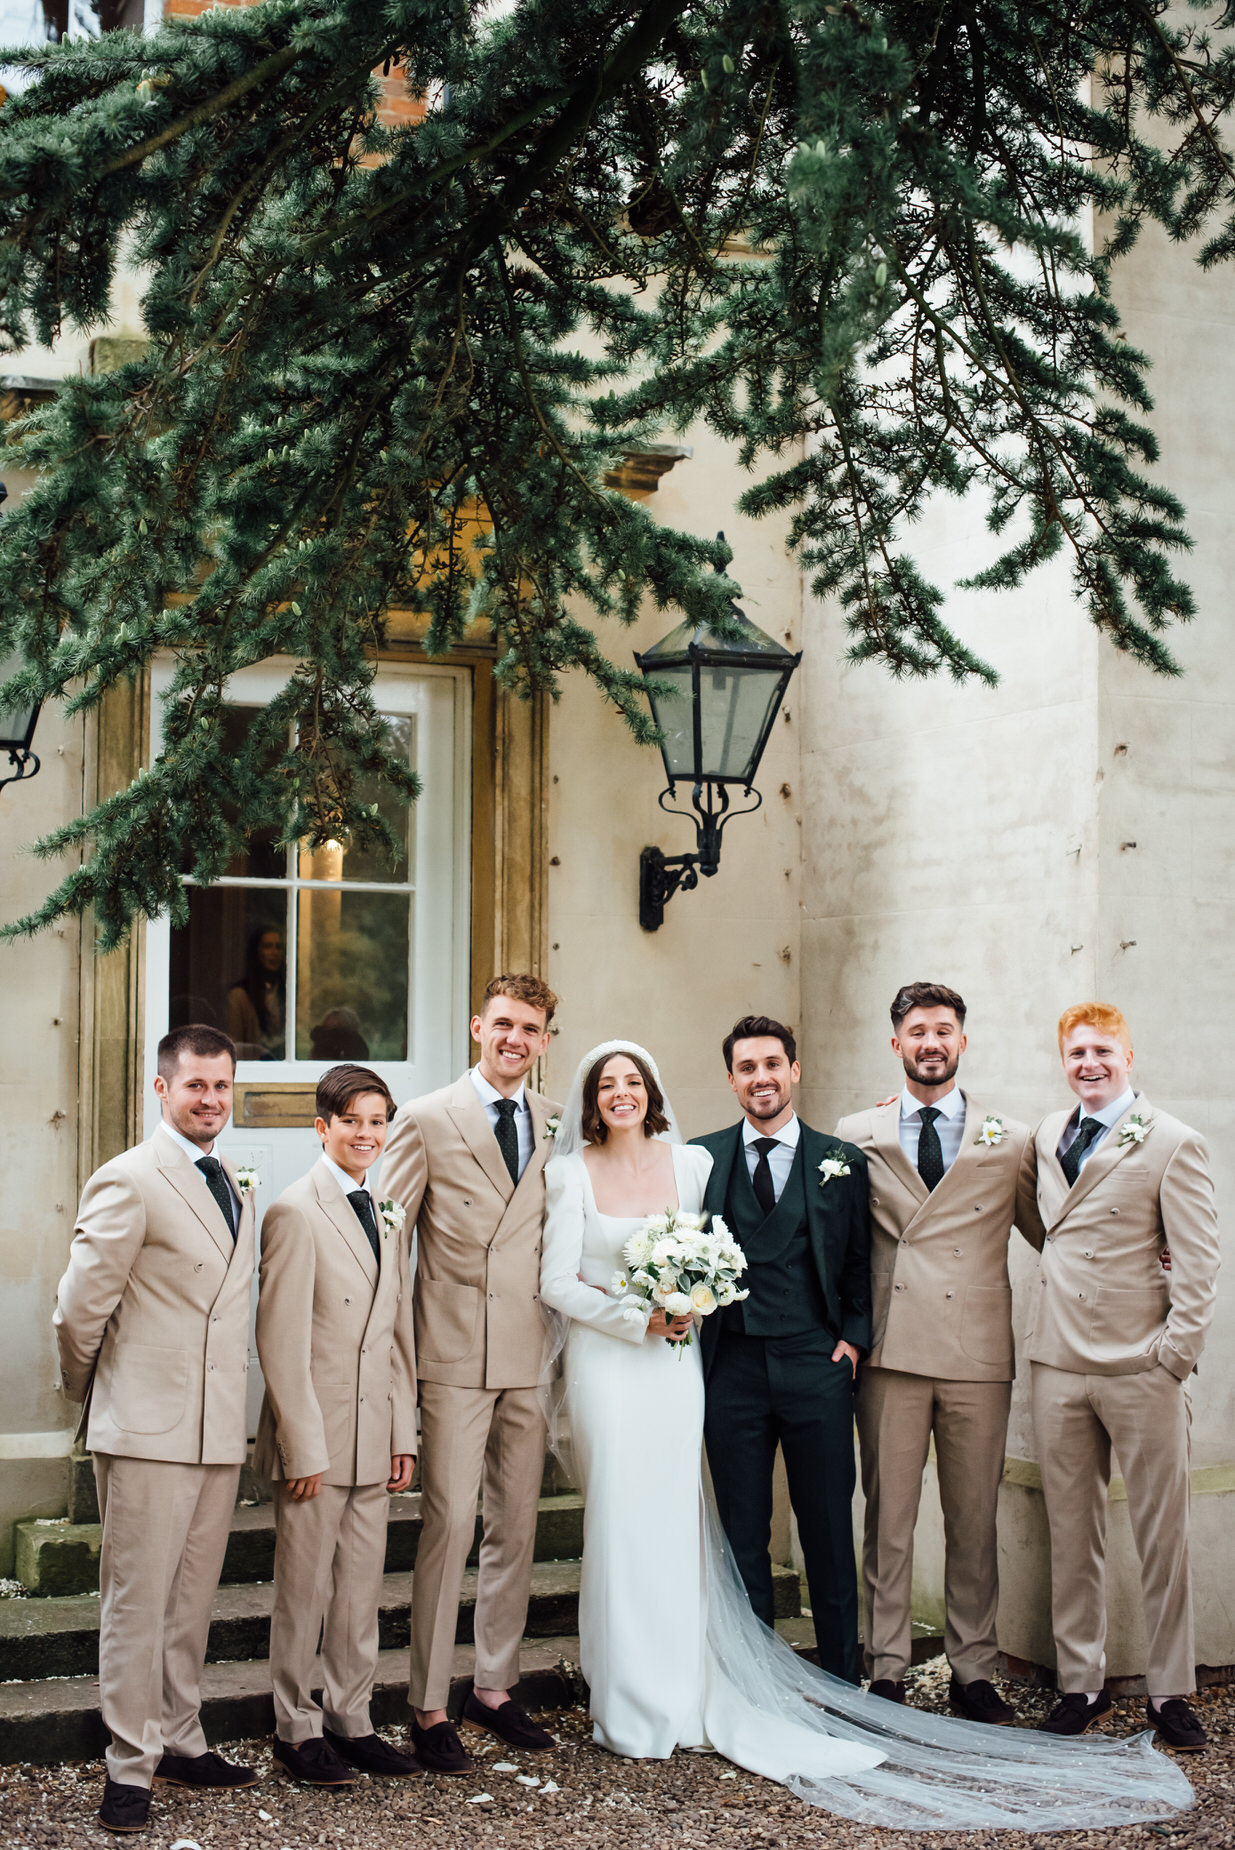 Aswarby bride, authentic wedding photography, Aswarby Rectory Wedding, michelle wood photographer